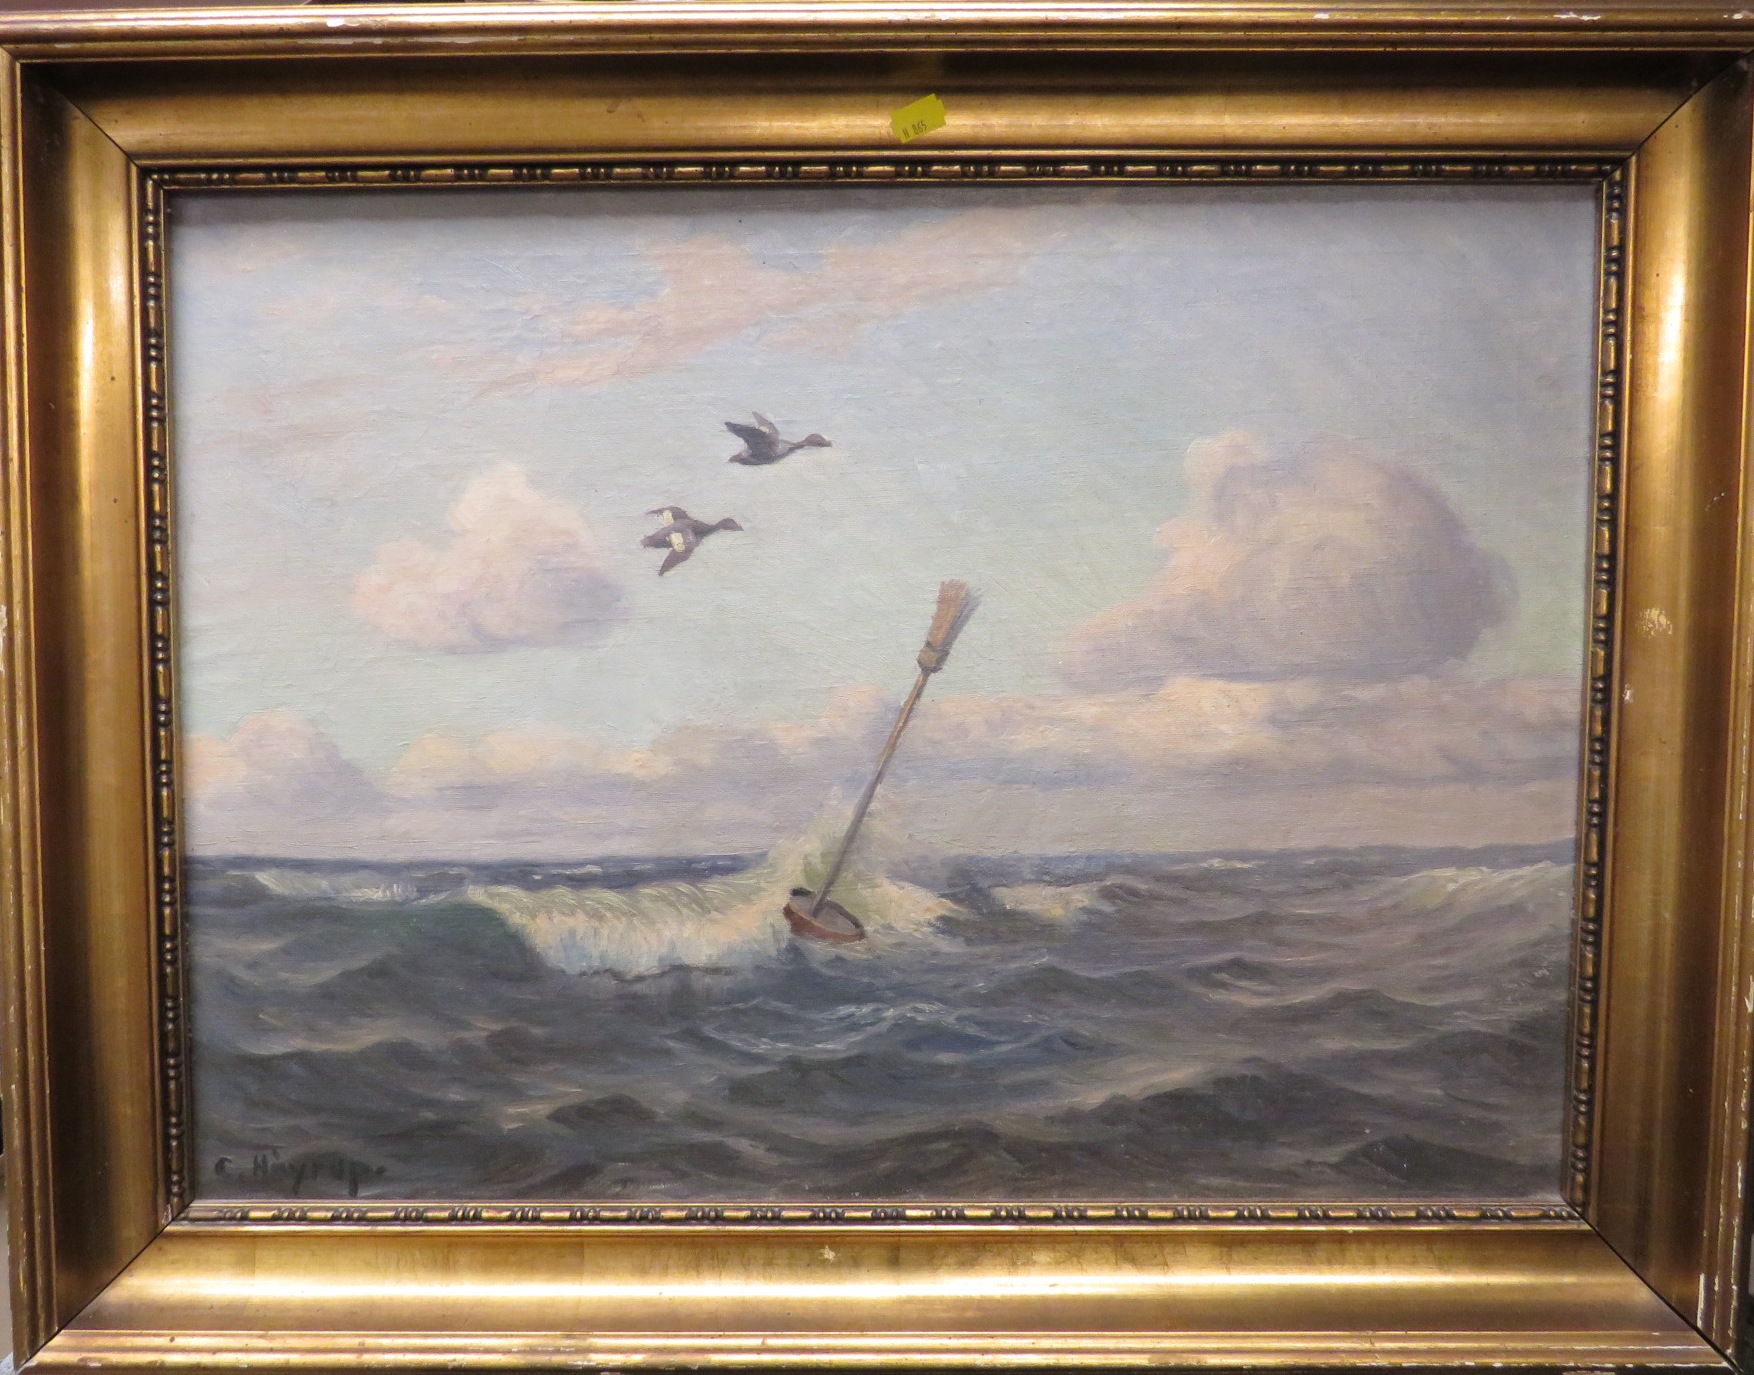 Choppy sea with broom buoy and two ducks in flight, oil on canvas, (46cm x 64cm) signed C. HOYRUP. - Image 2 of 5